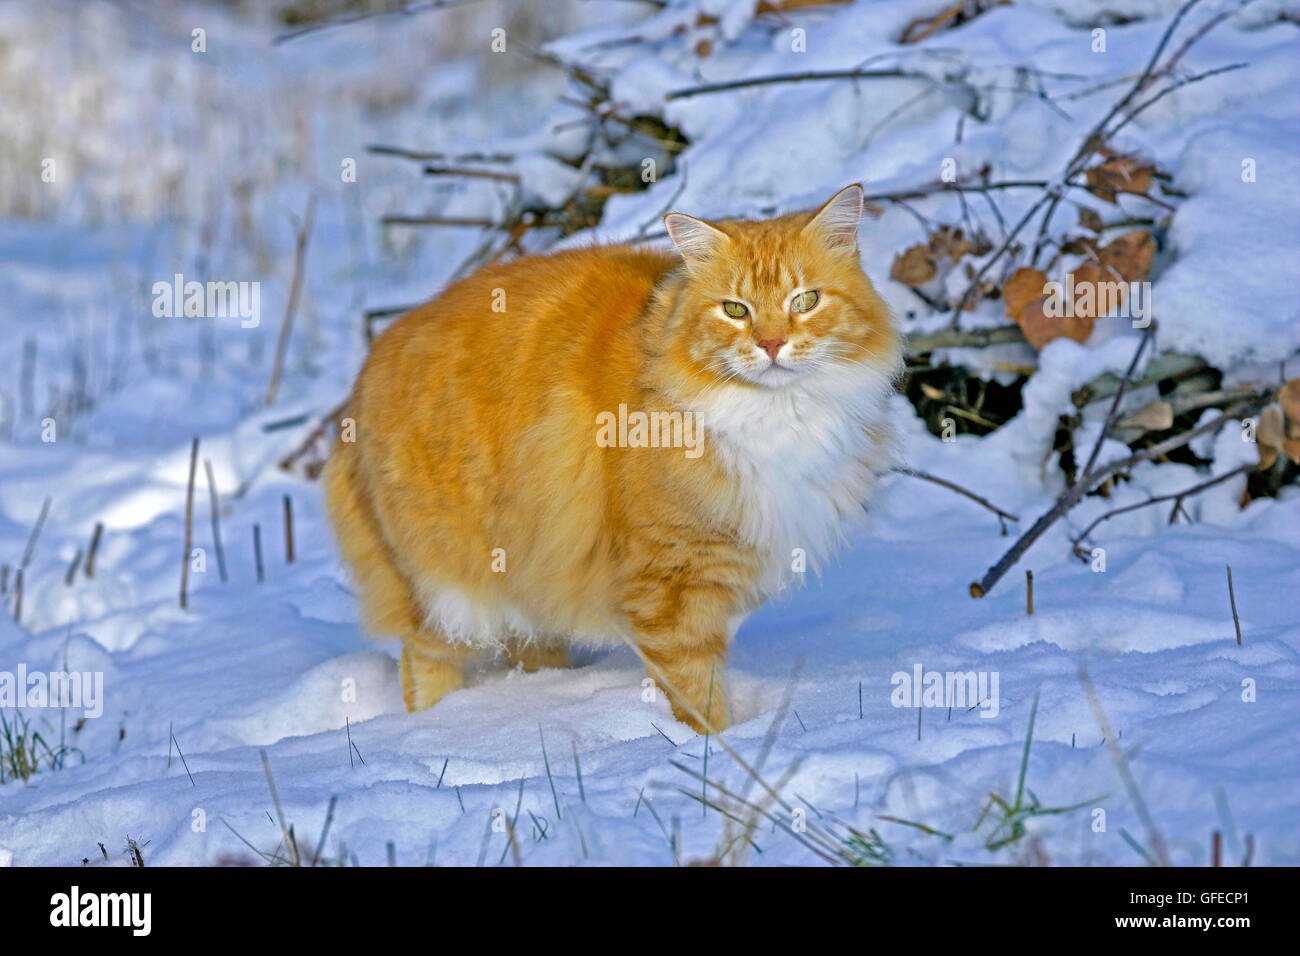 Beautiful long-haired ginger tabby  Cat walking on snow Stock Photo